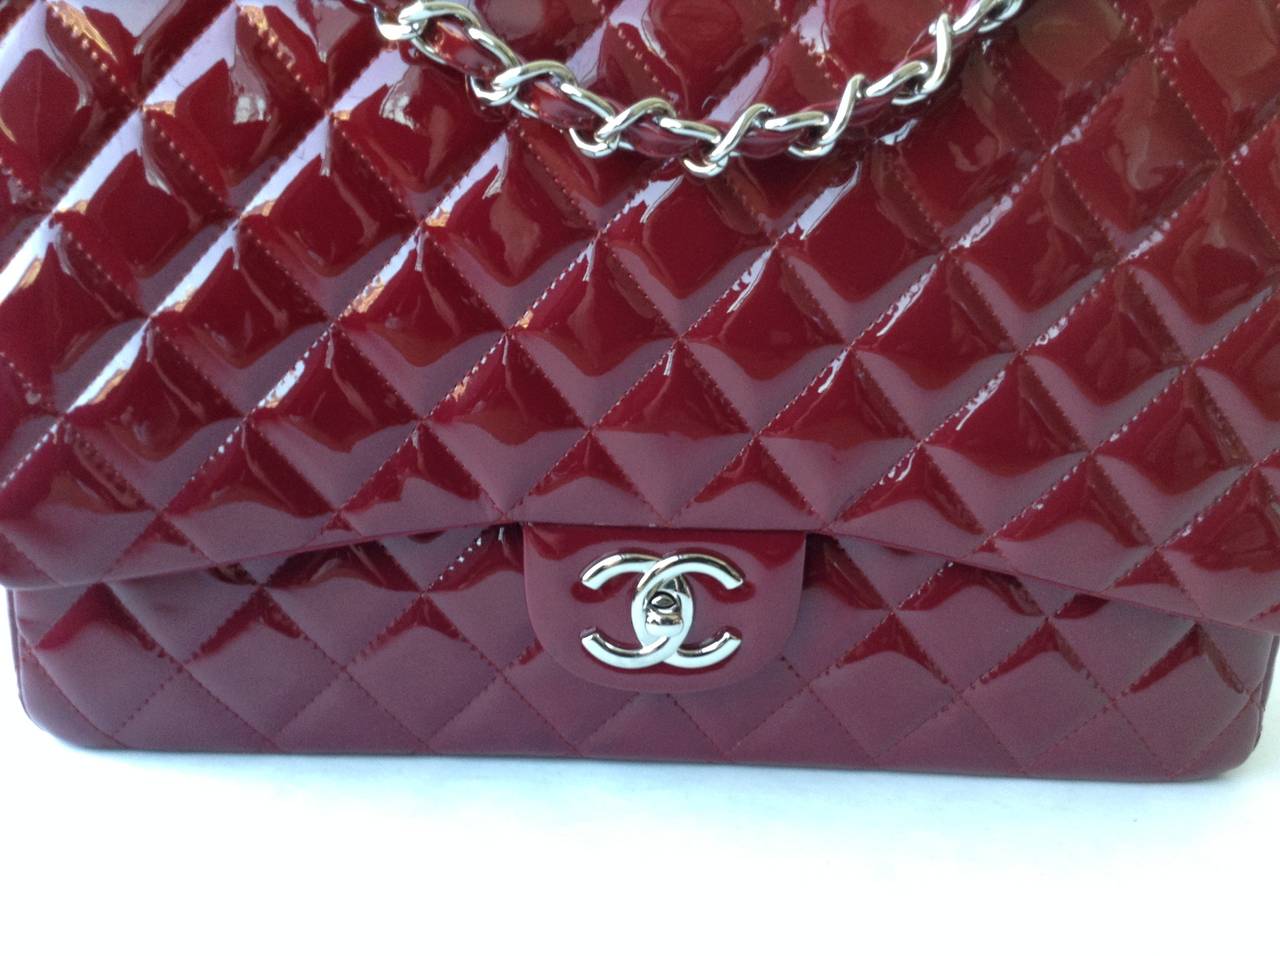 Patent leather
comes with sticker & matching authenticity card
comes with dust bag & chanel box